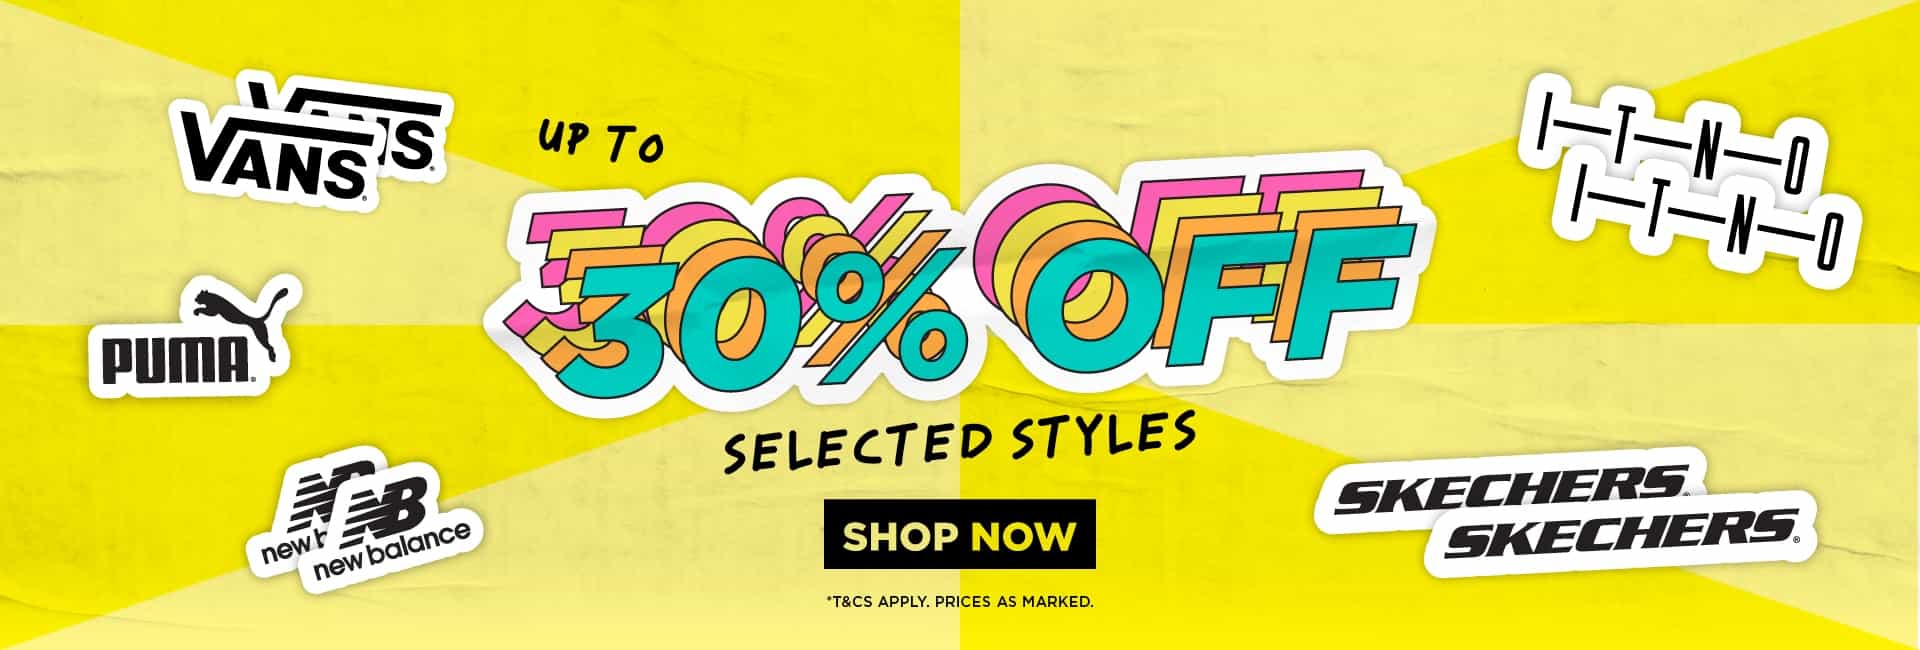 Platypus Shoes up to 30% OFF on selected styles including Vans, Puma, Skechers & more